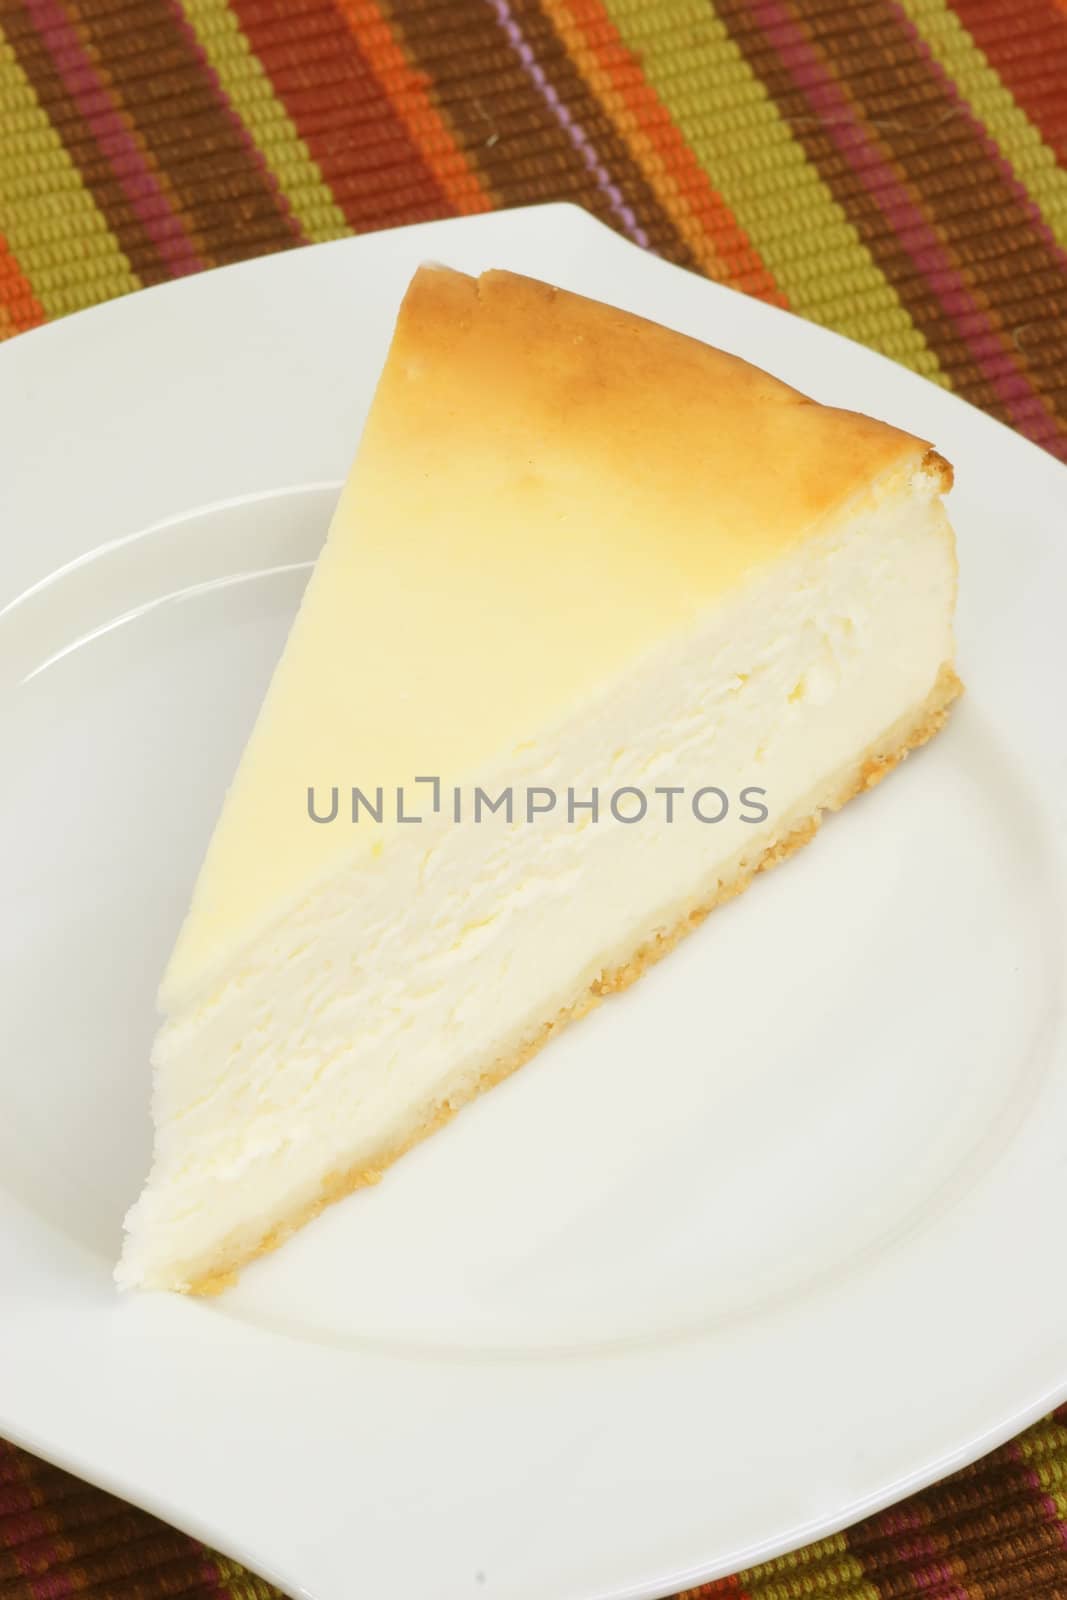 Slice of cheesecake on a kitchen plate